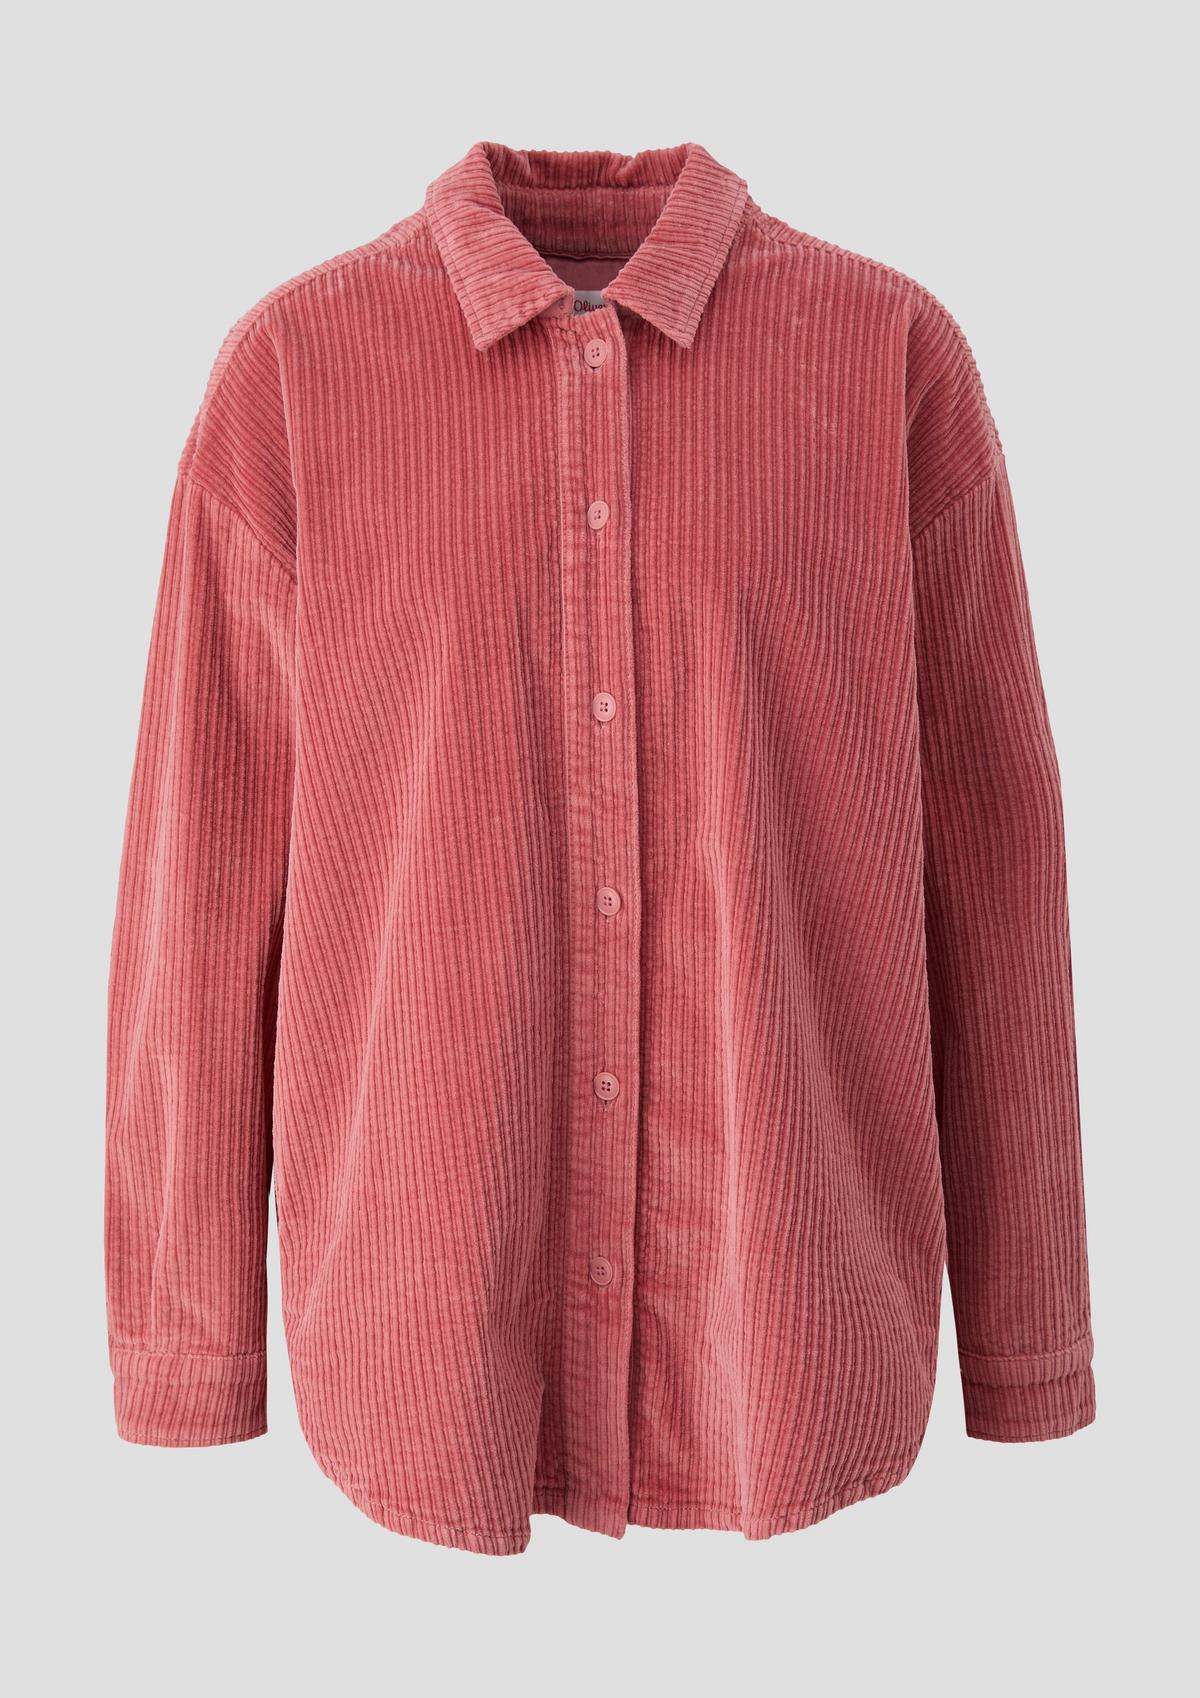 s.Oliver overshirt made of corduroy